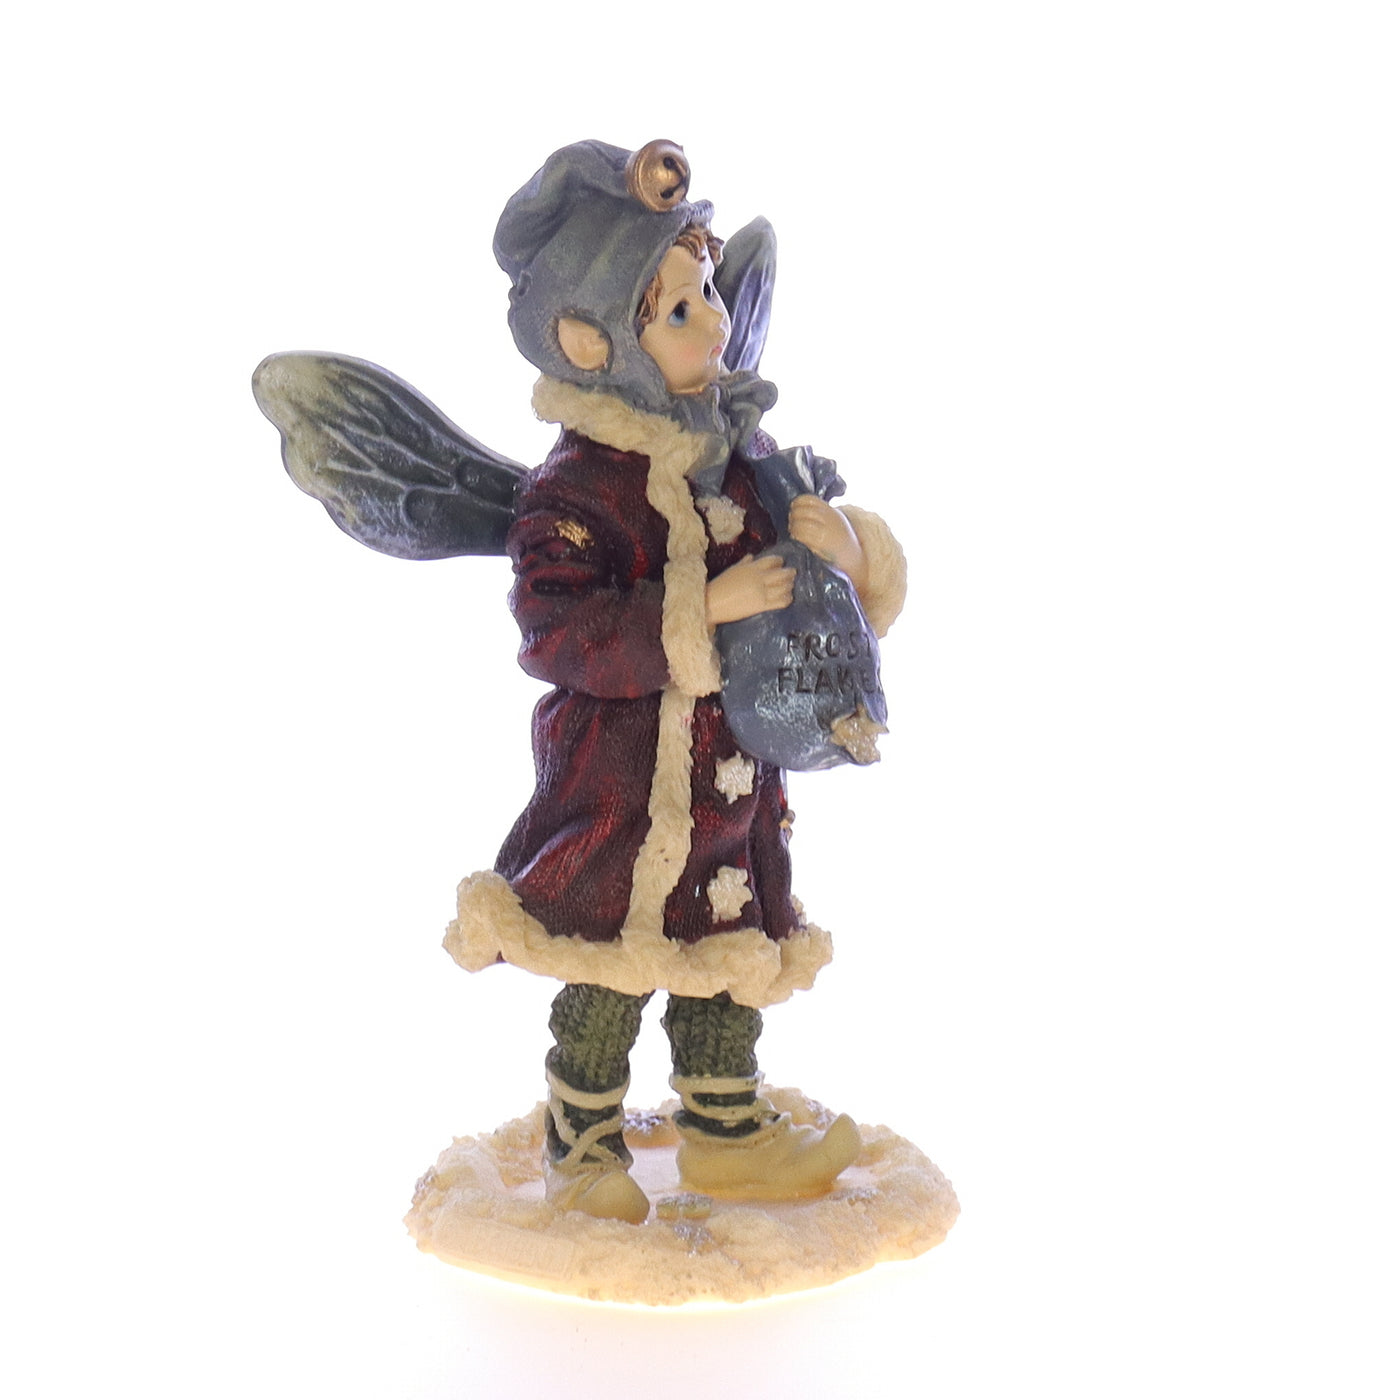 The_Wee_Folkstone_Collection_36002_Kristabell_Faeriefrost_Christmas_Figurine_1997 Front Right View